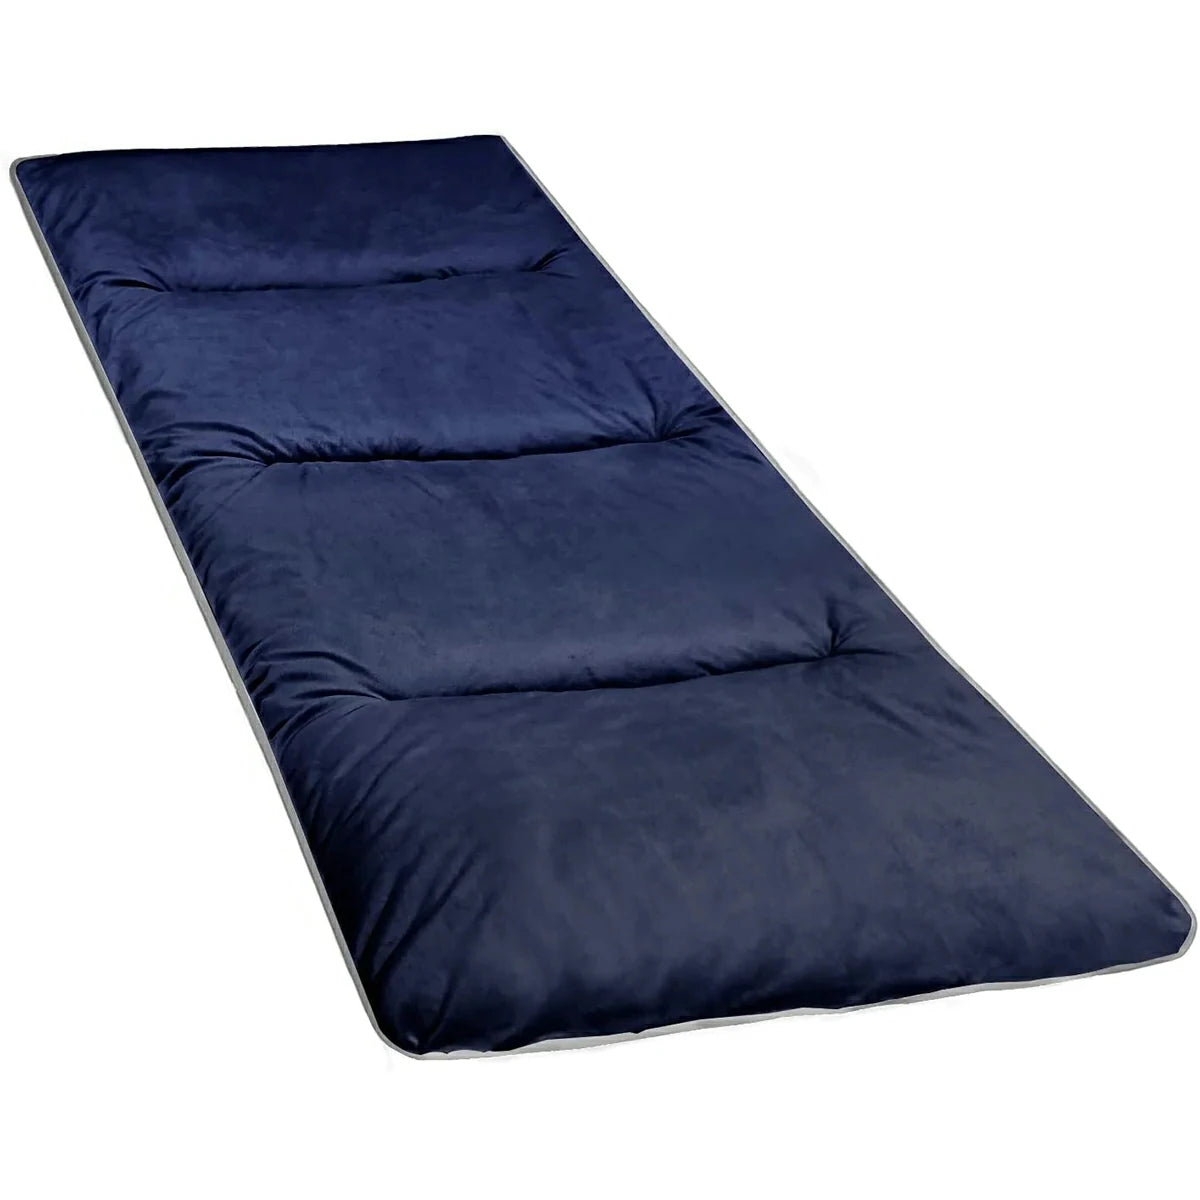 Portable Folding Sleeping Cot Mattress Pads for Camping,Gray Blue Black Brown